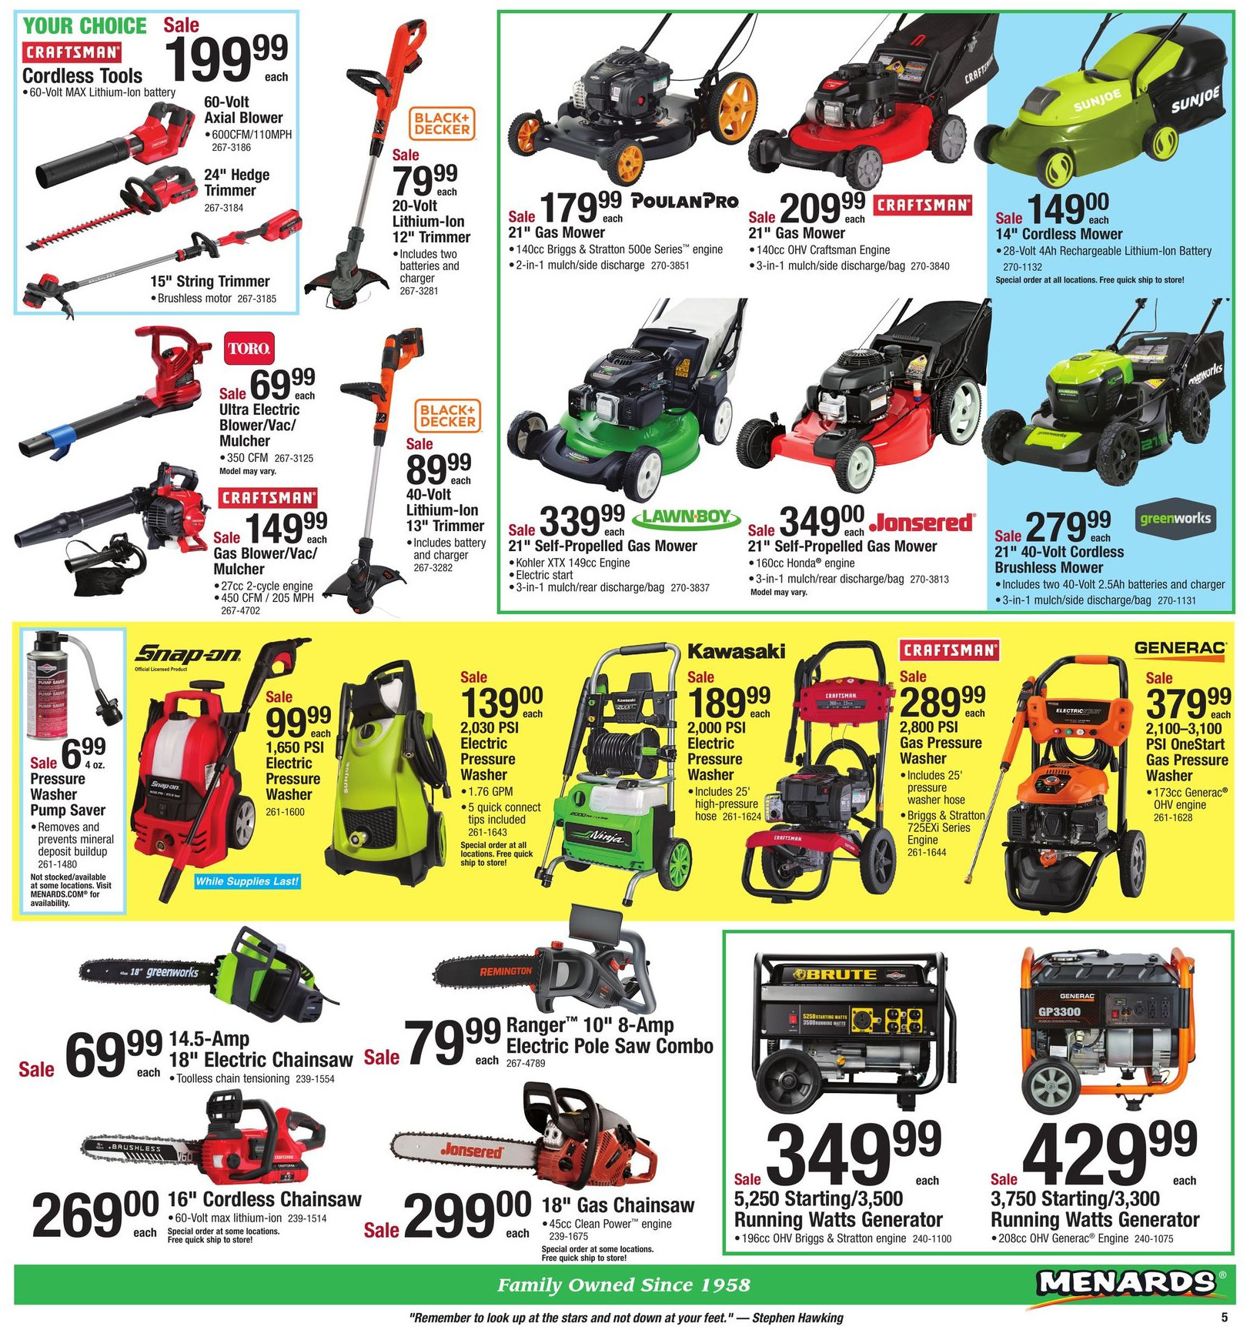 Menards Current weekly ad 04/21 - 05/05/2019 [7] - www.bagssaleusa.com/product-category/classic-bags/